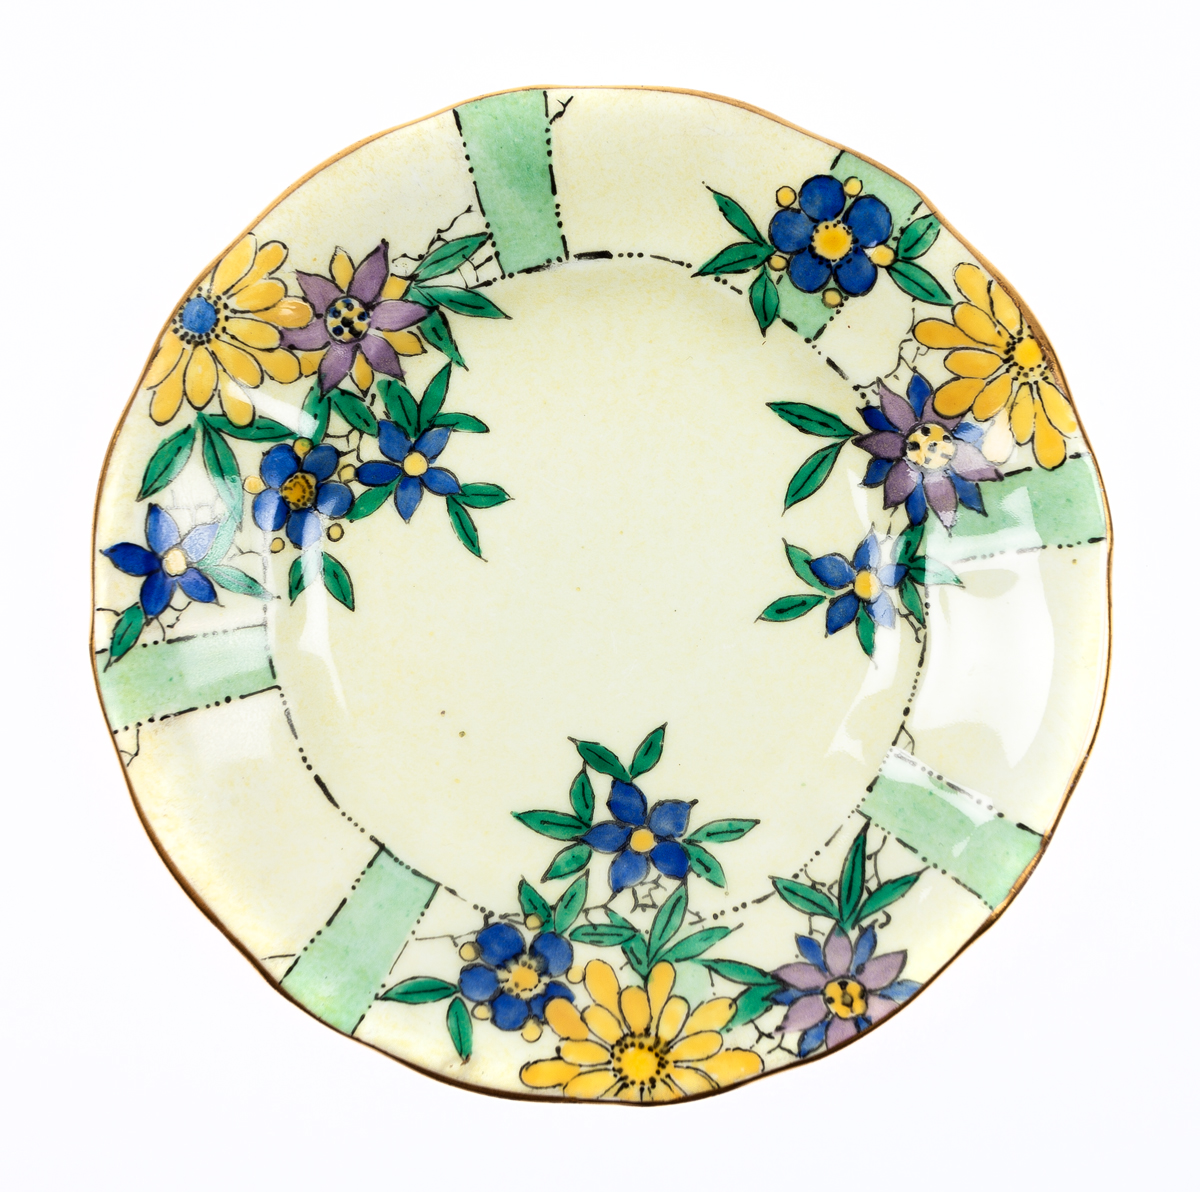 Design · Royal Crown Derby hand-painted tea plate, by Agnes Bain Herbert · Early 20th century